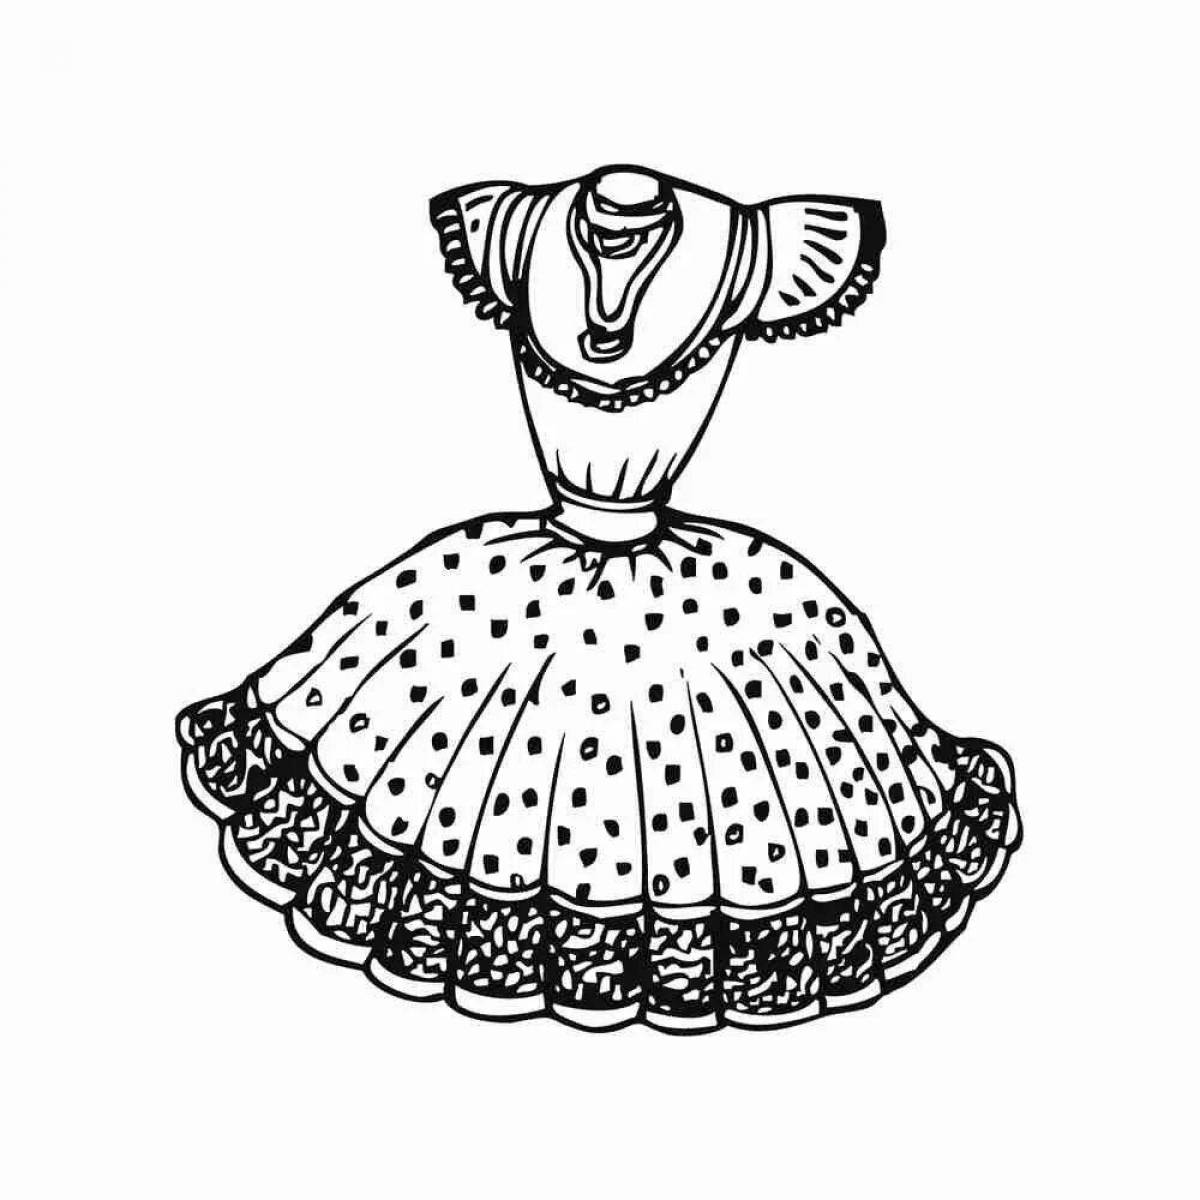 Adorable dress coloring page for children 2-3 years old